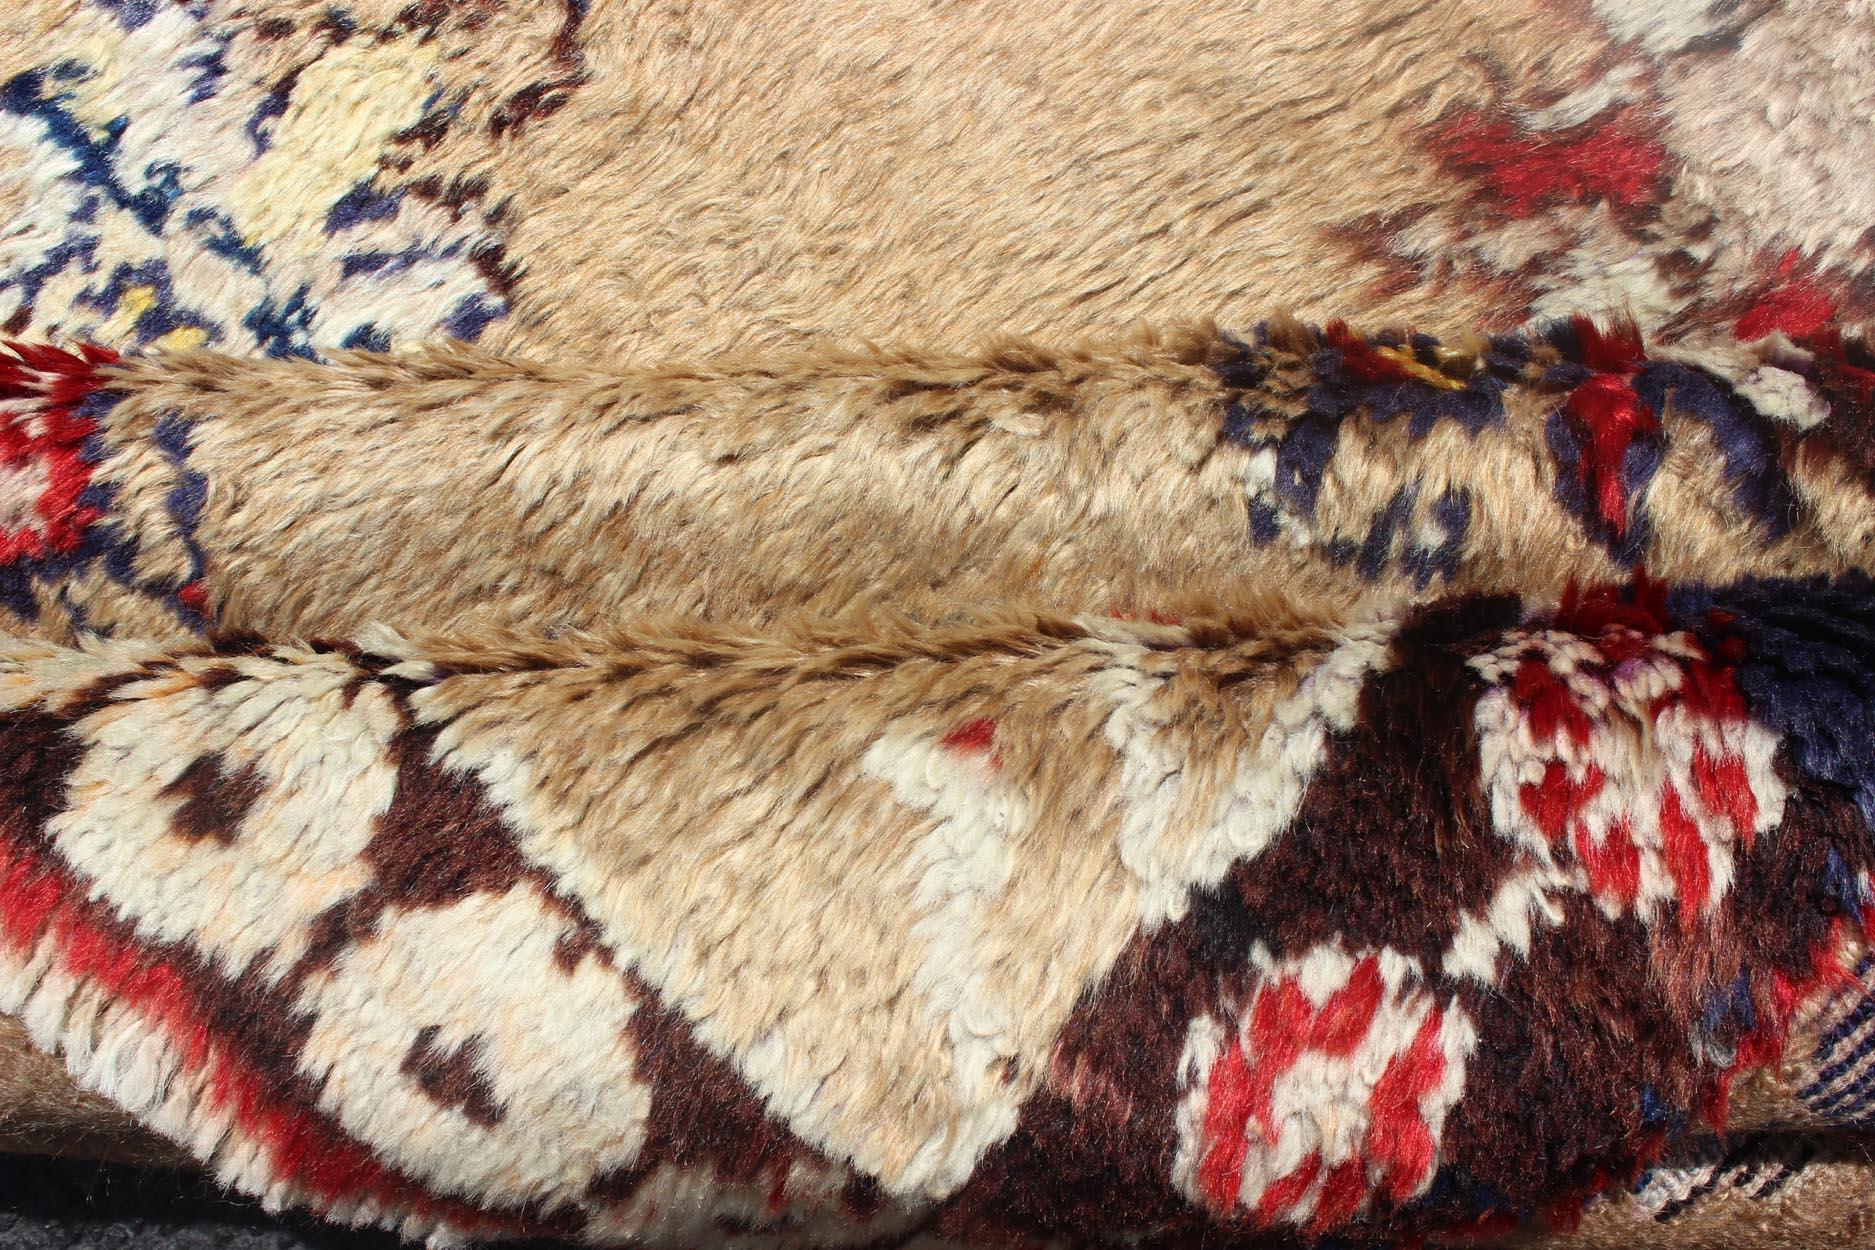 20th Century Angora Turkish Tulu Carpet with Colorful Floral Designs Set on Sand Field For Sale